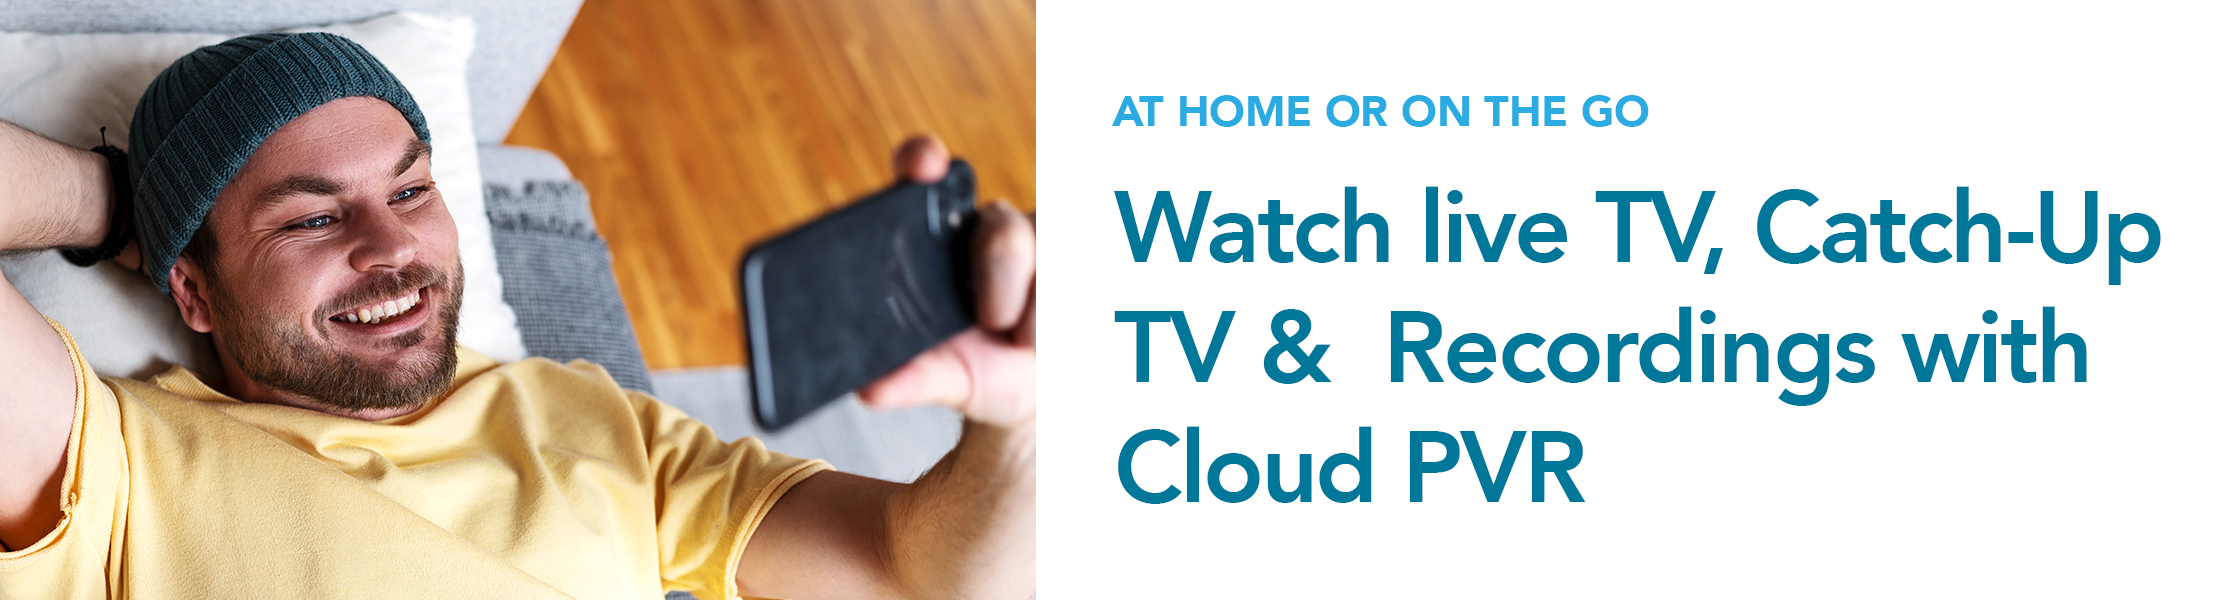 Watch live TV, catch-up TV & recordings with Cloud PVR